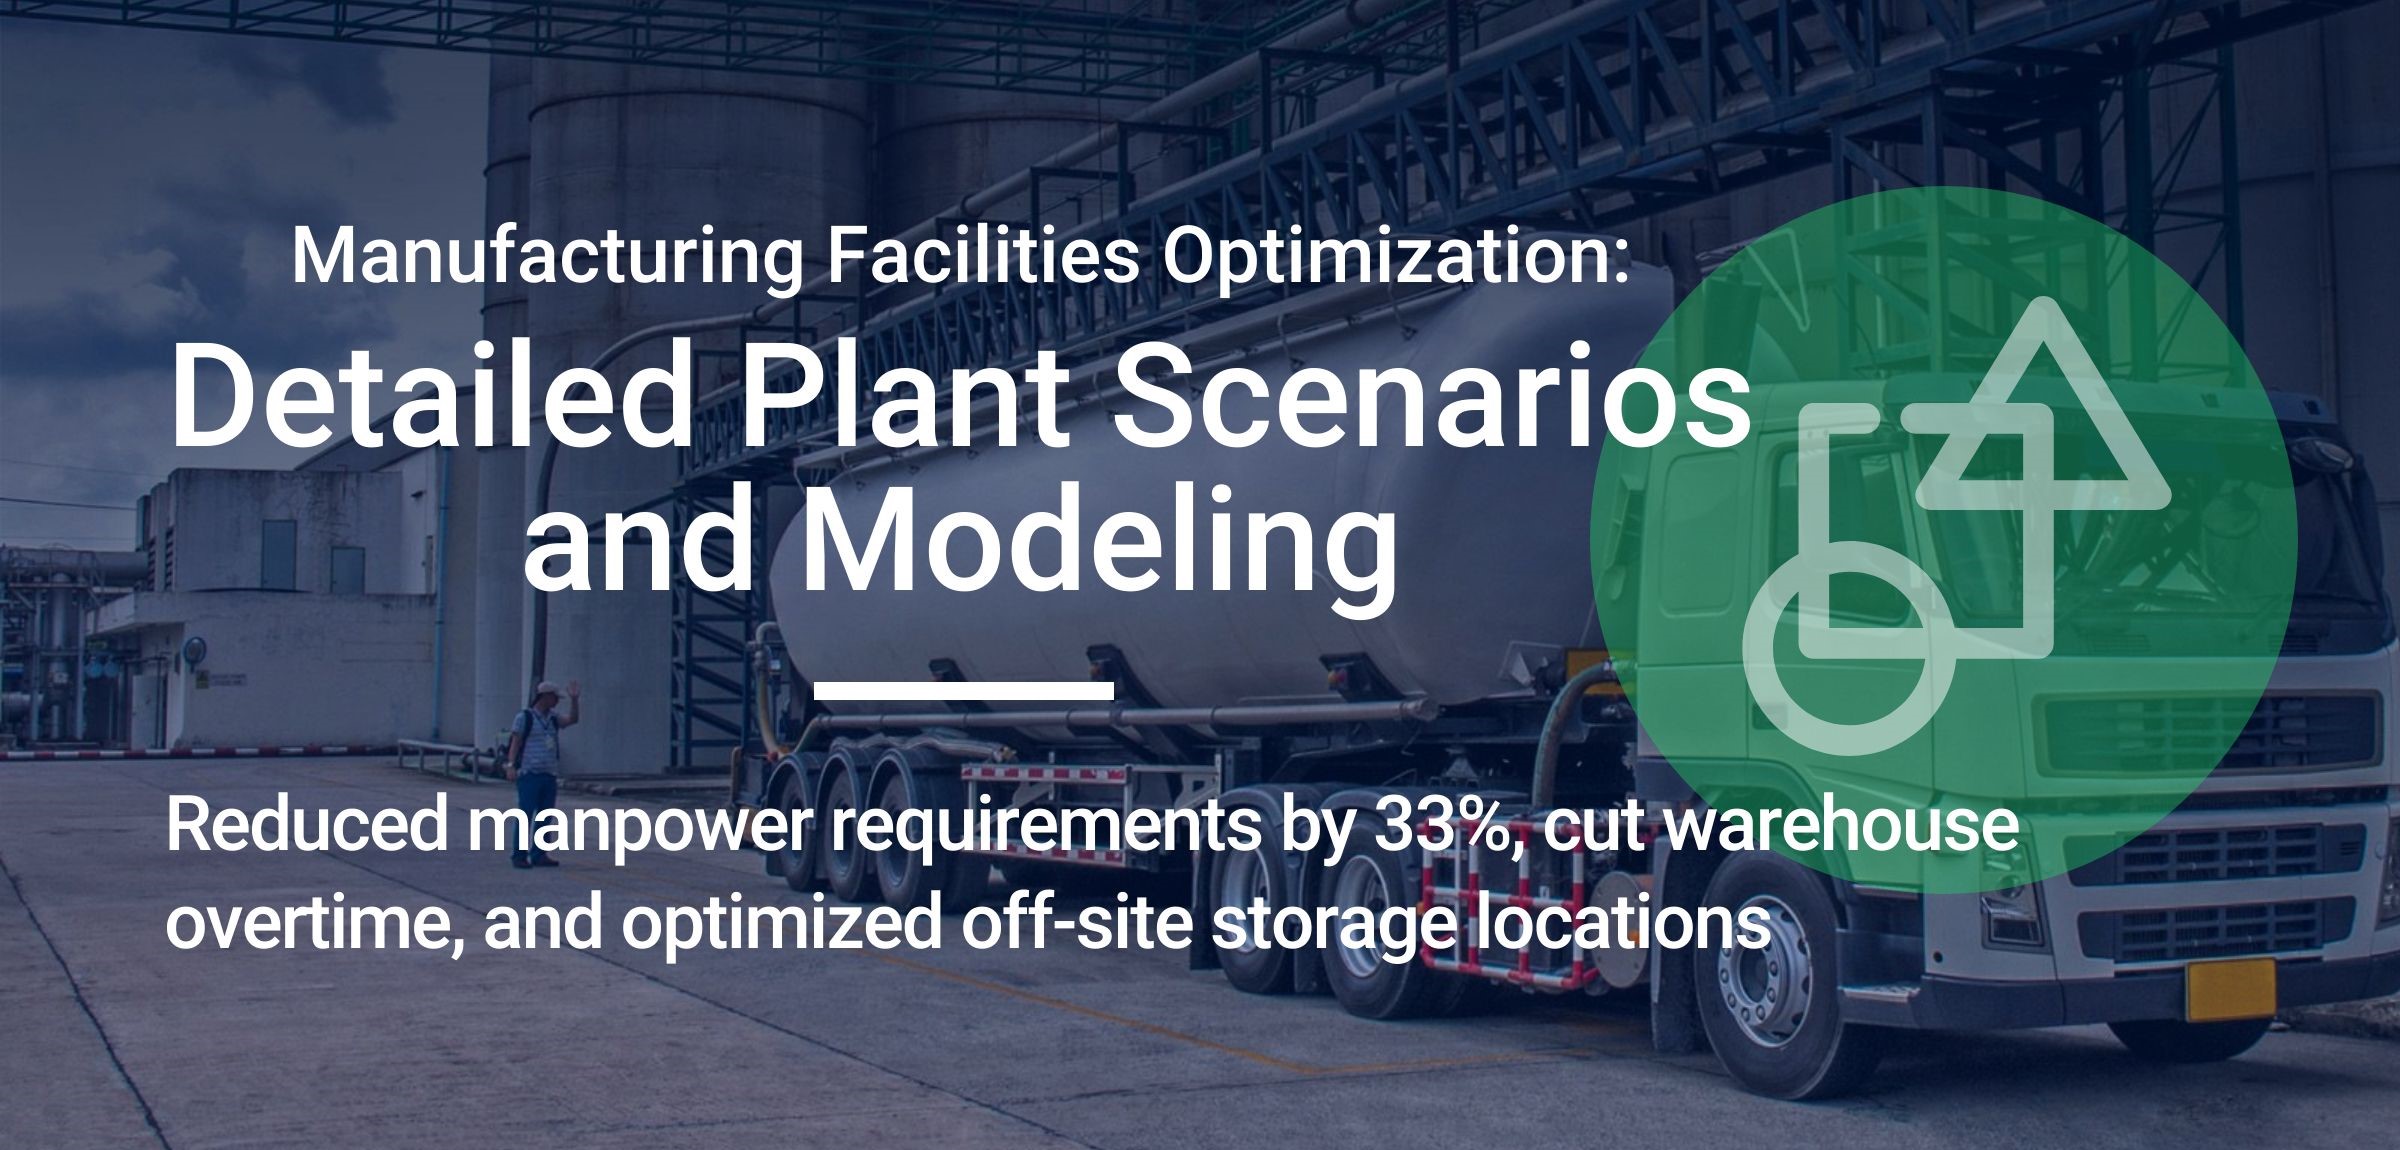 Manufacturing Facilities Optimization: Detailed Plant Scenarios and Modeling - Reduced manpoower requirements by 33%, cut warehouse overtime, and optimized off-site storage locations